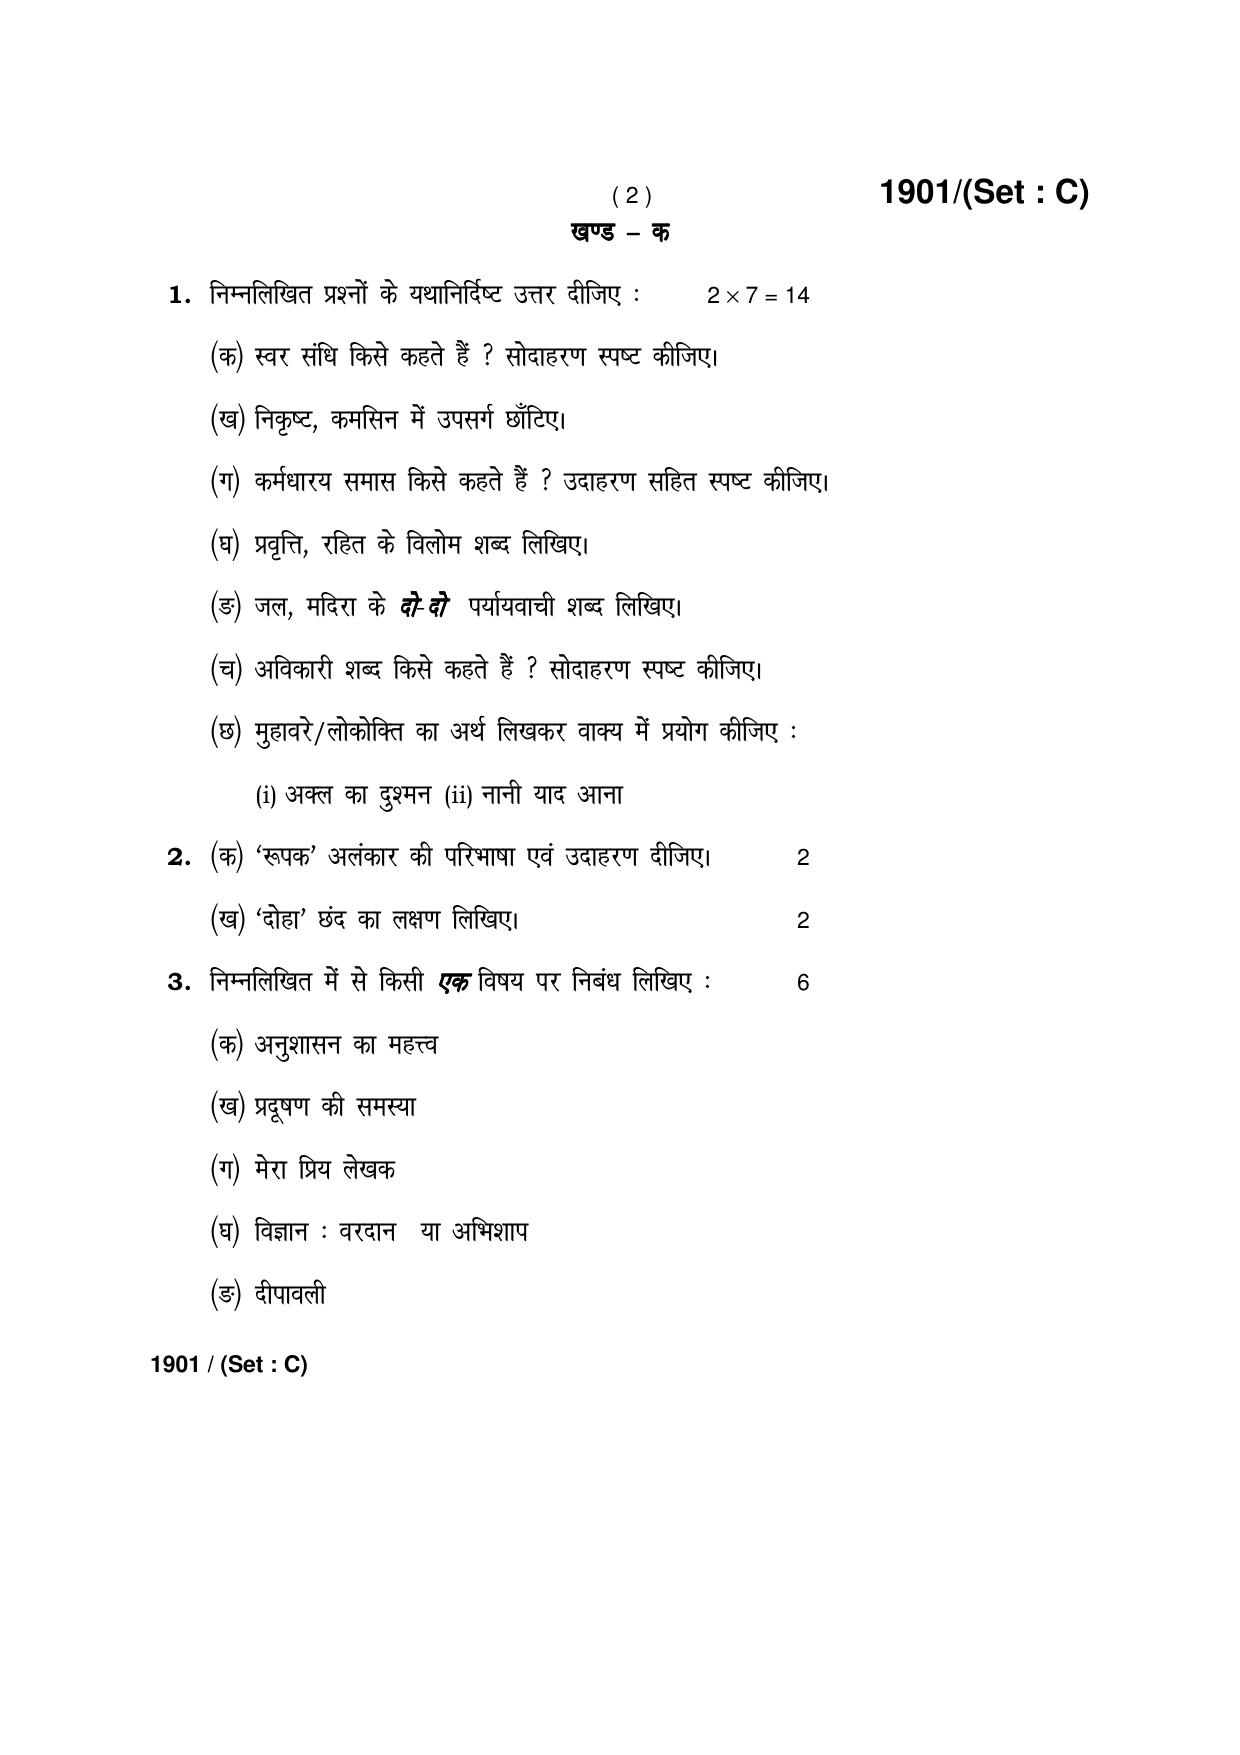 Haryana Board HBSE Class 10 Hindi -C 2017 Question Paper - Page 2